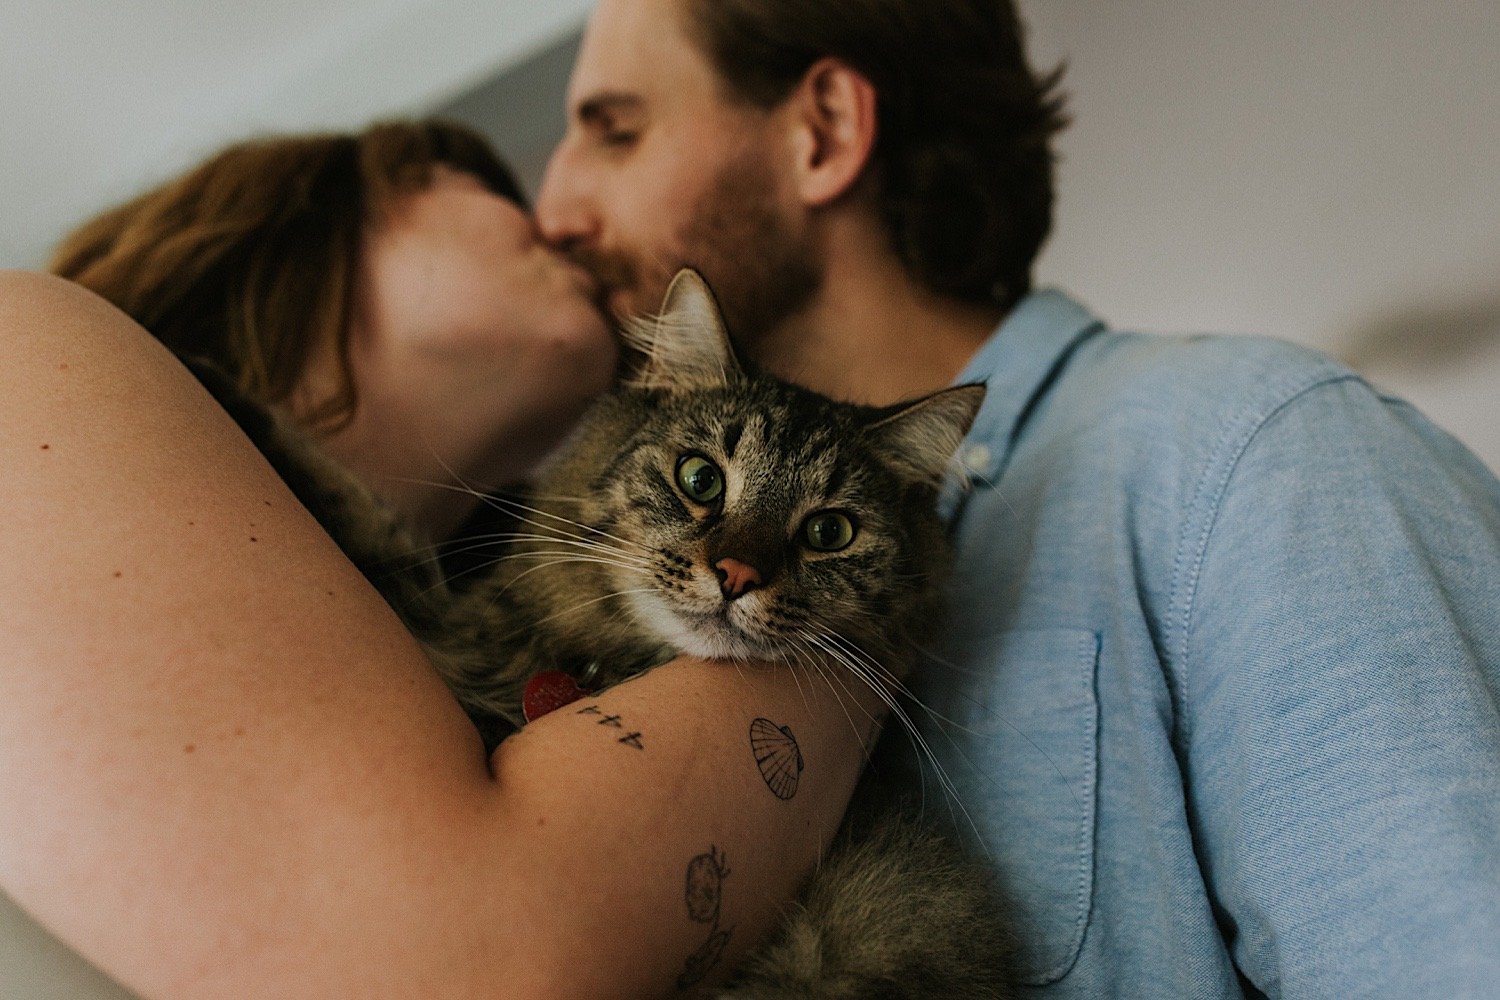 A couple embraces and kisses while holding their cat.  The cats' face is in focus, and the couple is kissing in the background.